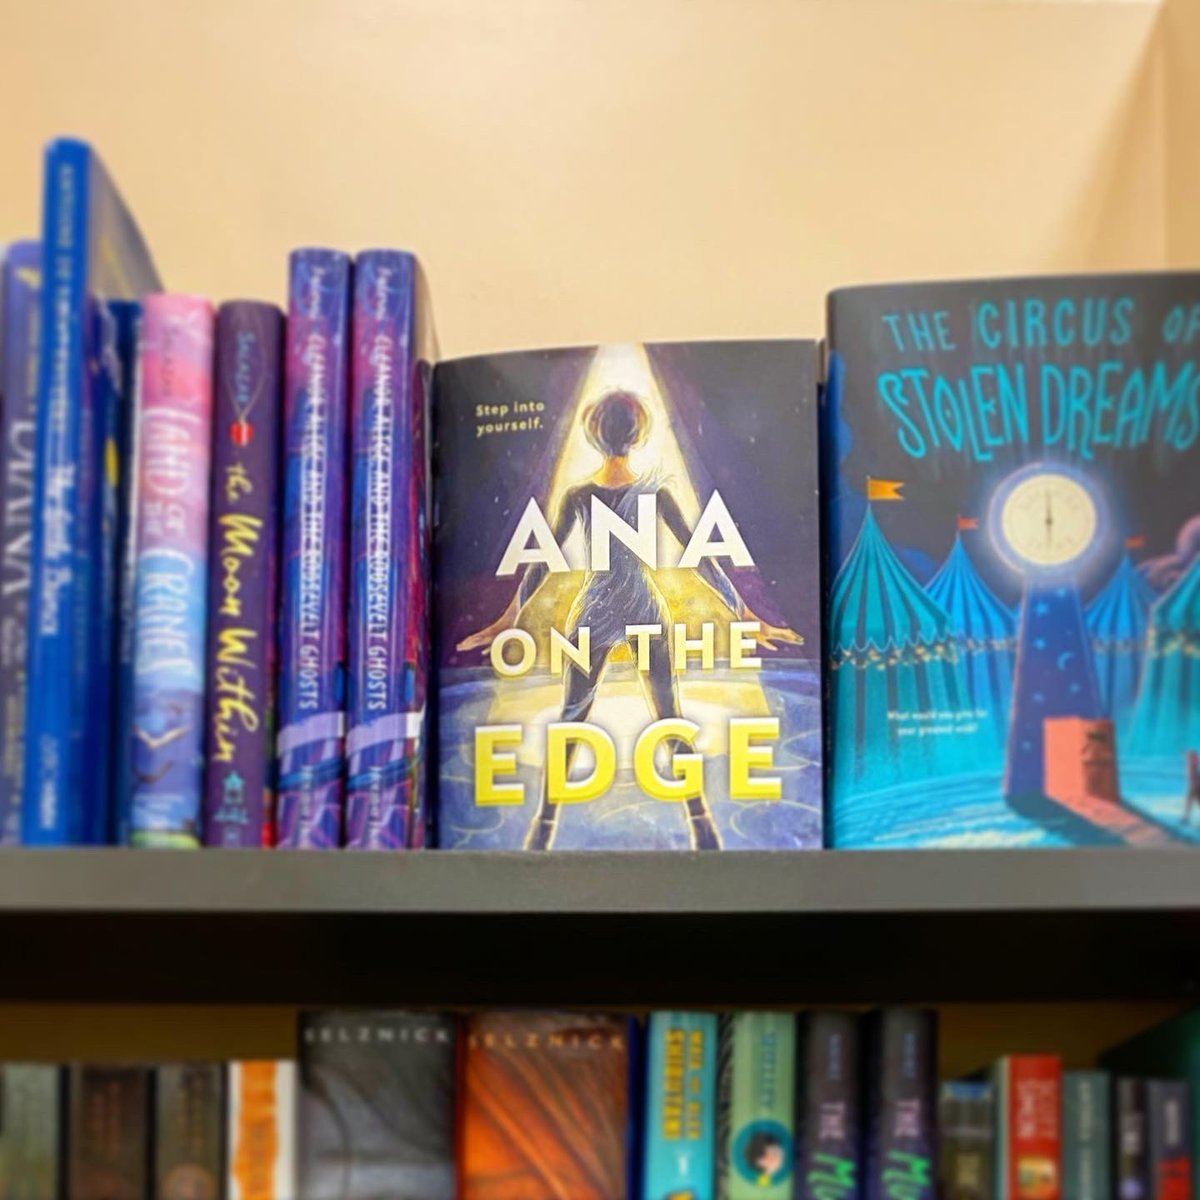 Steps for authors who want to sign bookstore copies of their novel, part 2 of 5:2) Locate book (preferably the one you wrote but I’m not here to judge, you do you). Hey there,  #AnaontheEdge  